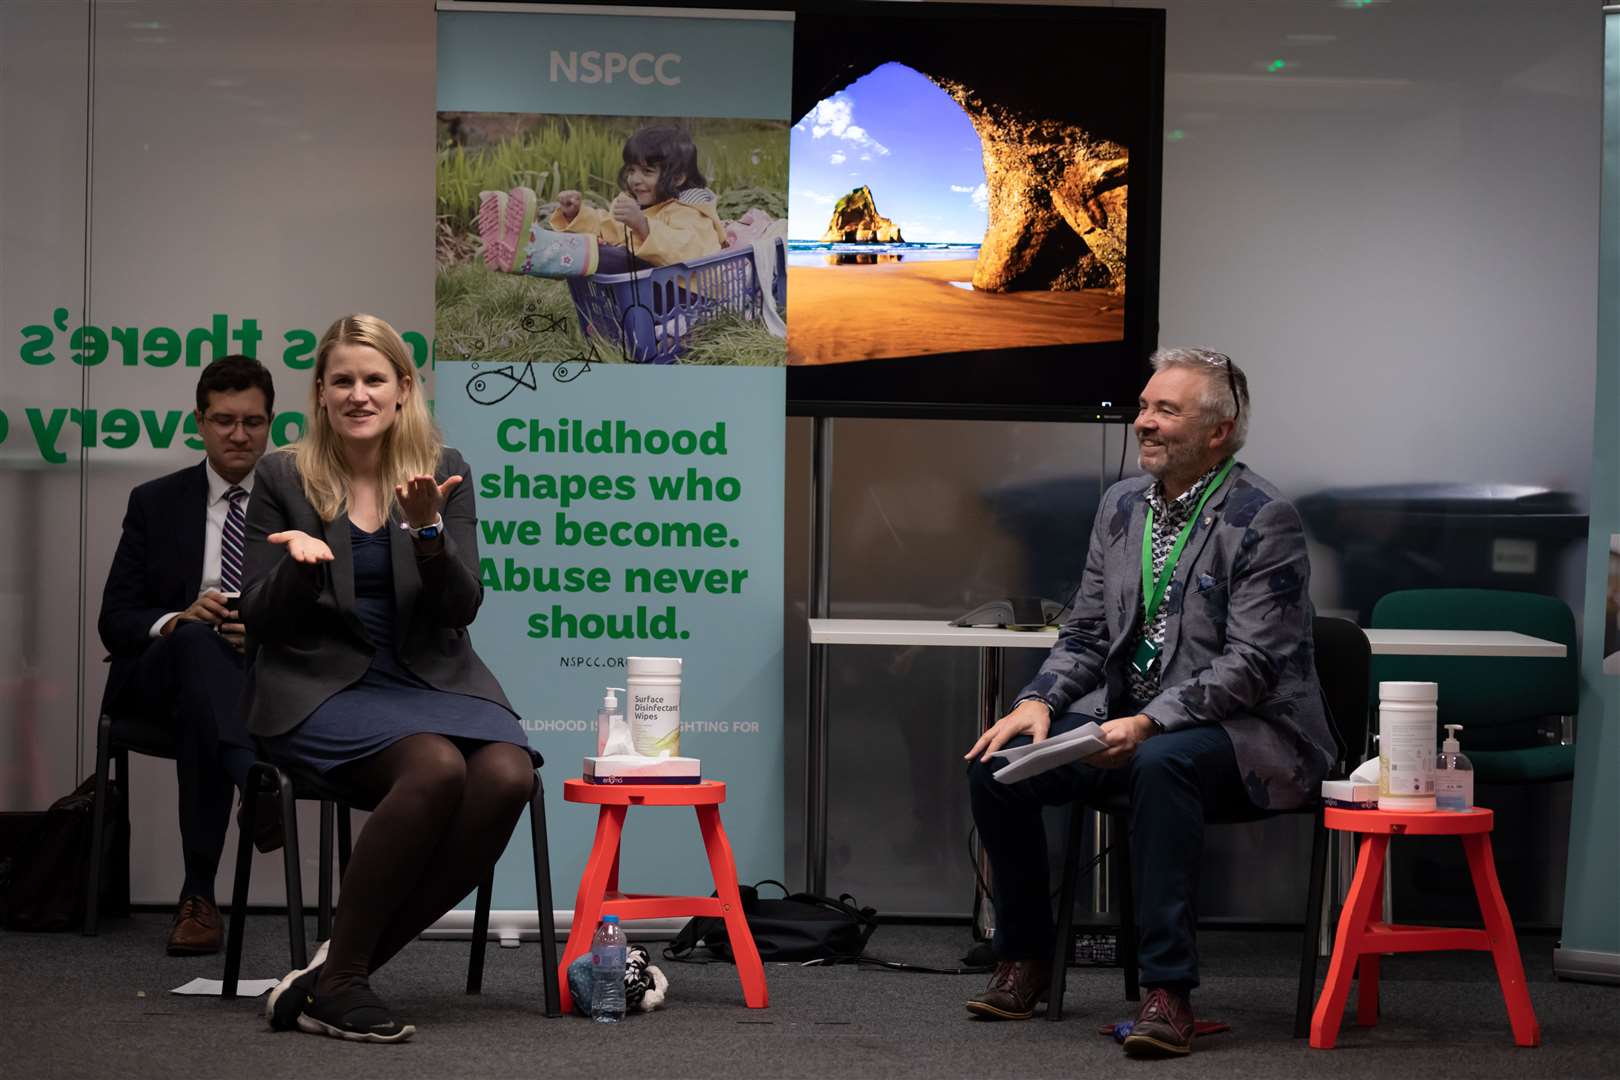 Frances Haugen met with child safety campaigners at the NSPCC’s headquarters on Thursday (Joel Chant/PA)